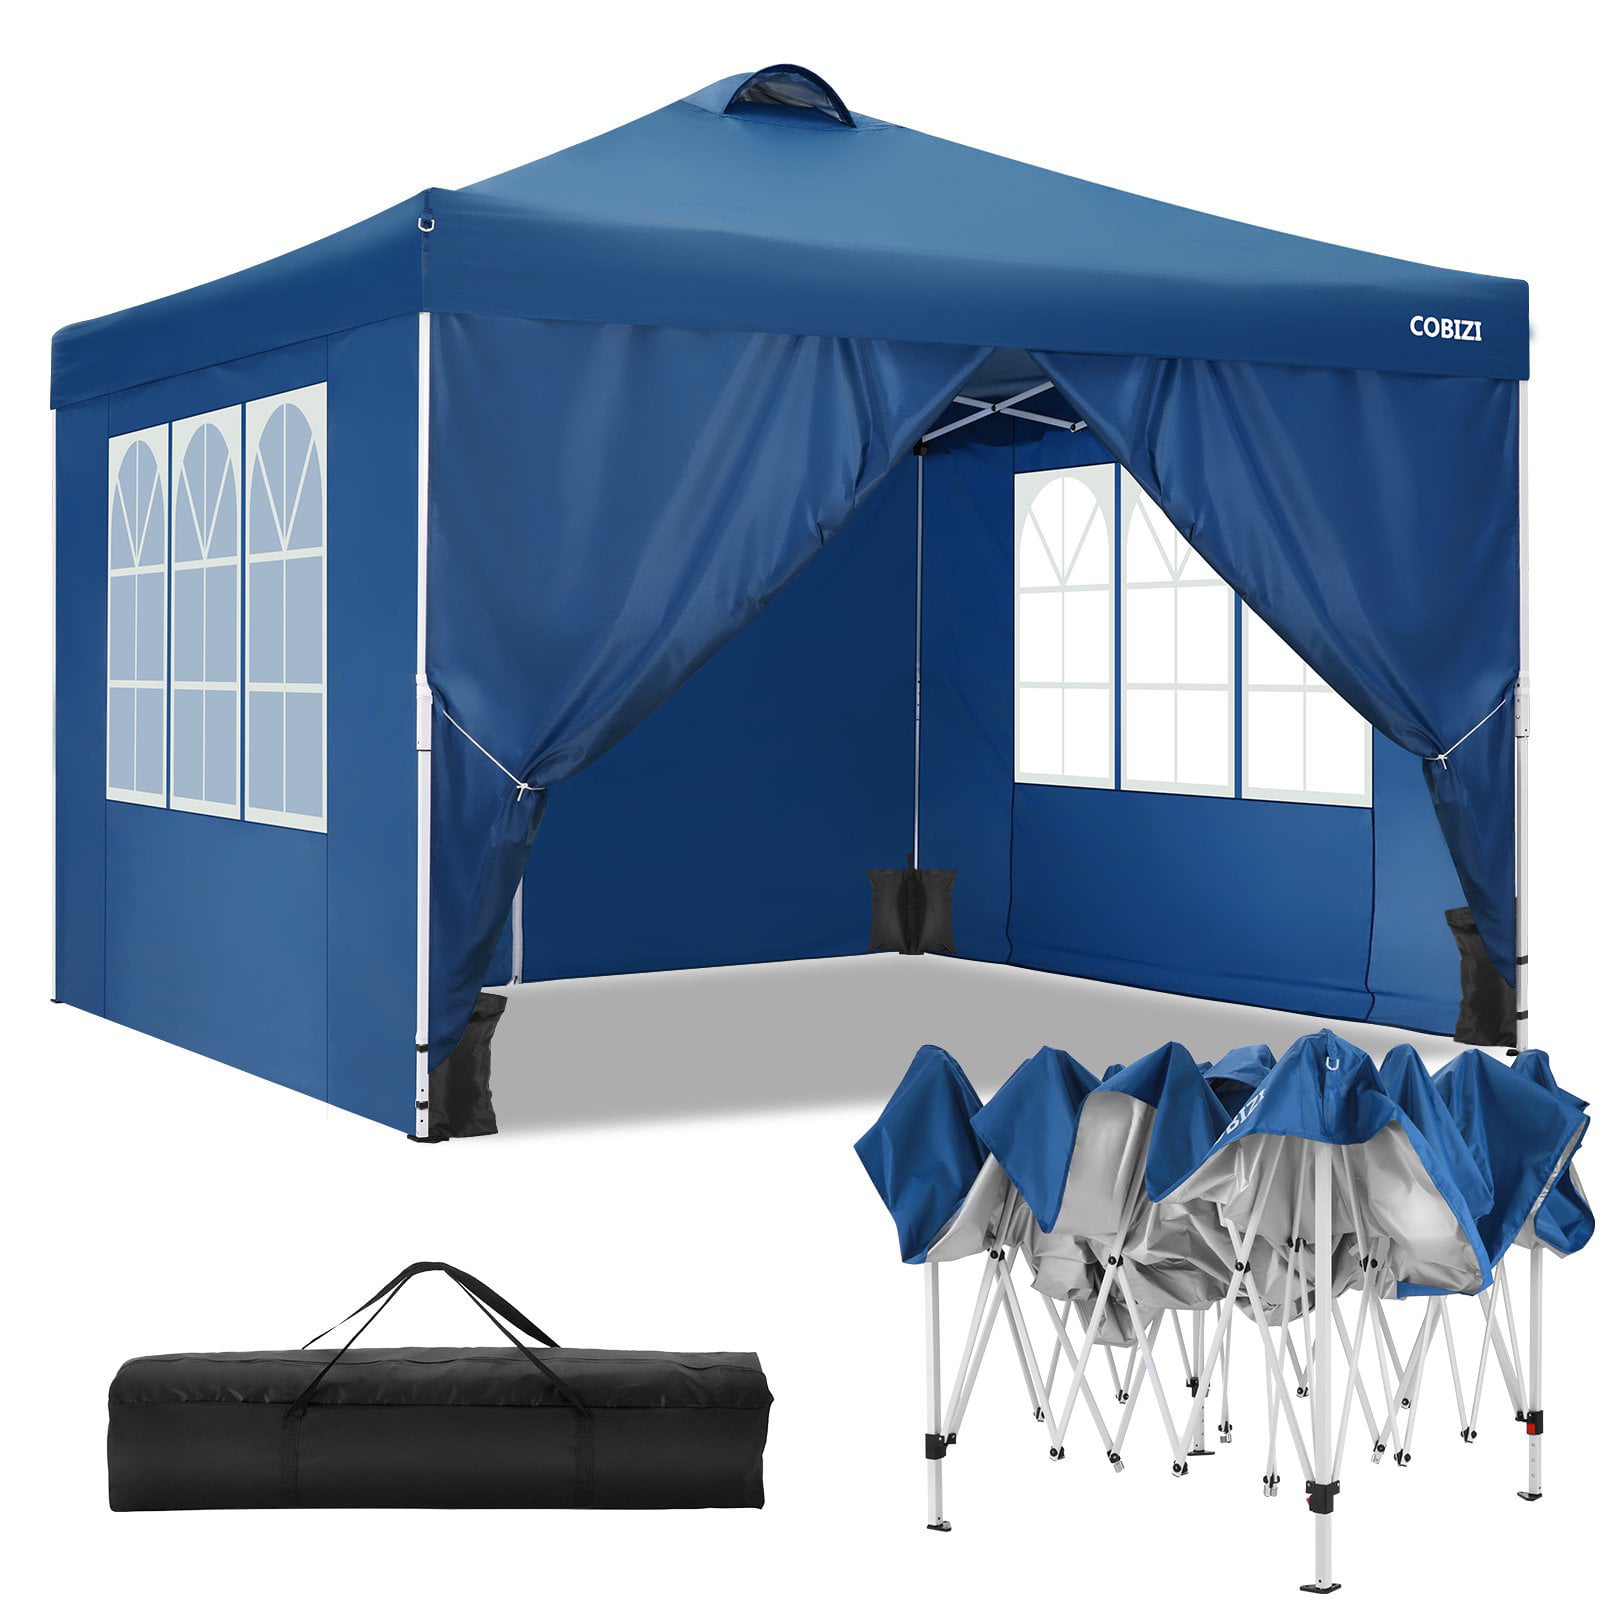 10'X10' Pop Up Canopy Outdoor Instant Foldable Patio Tent Blue New